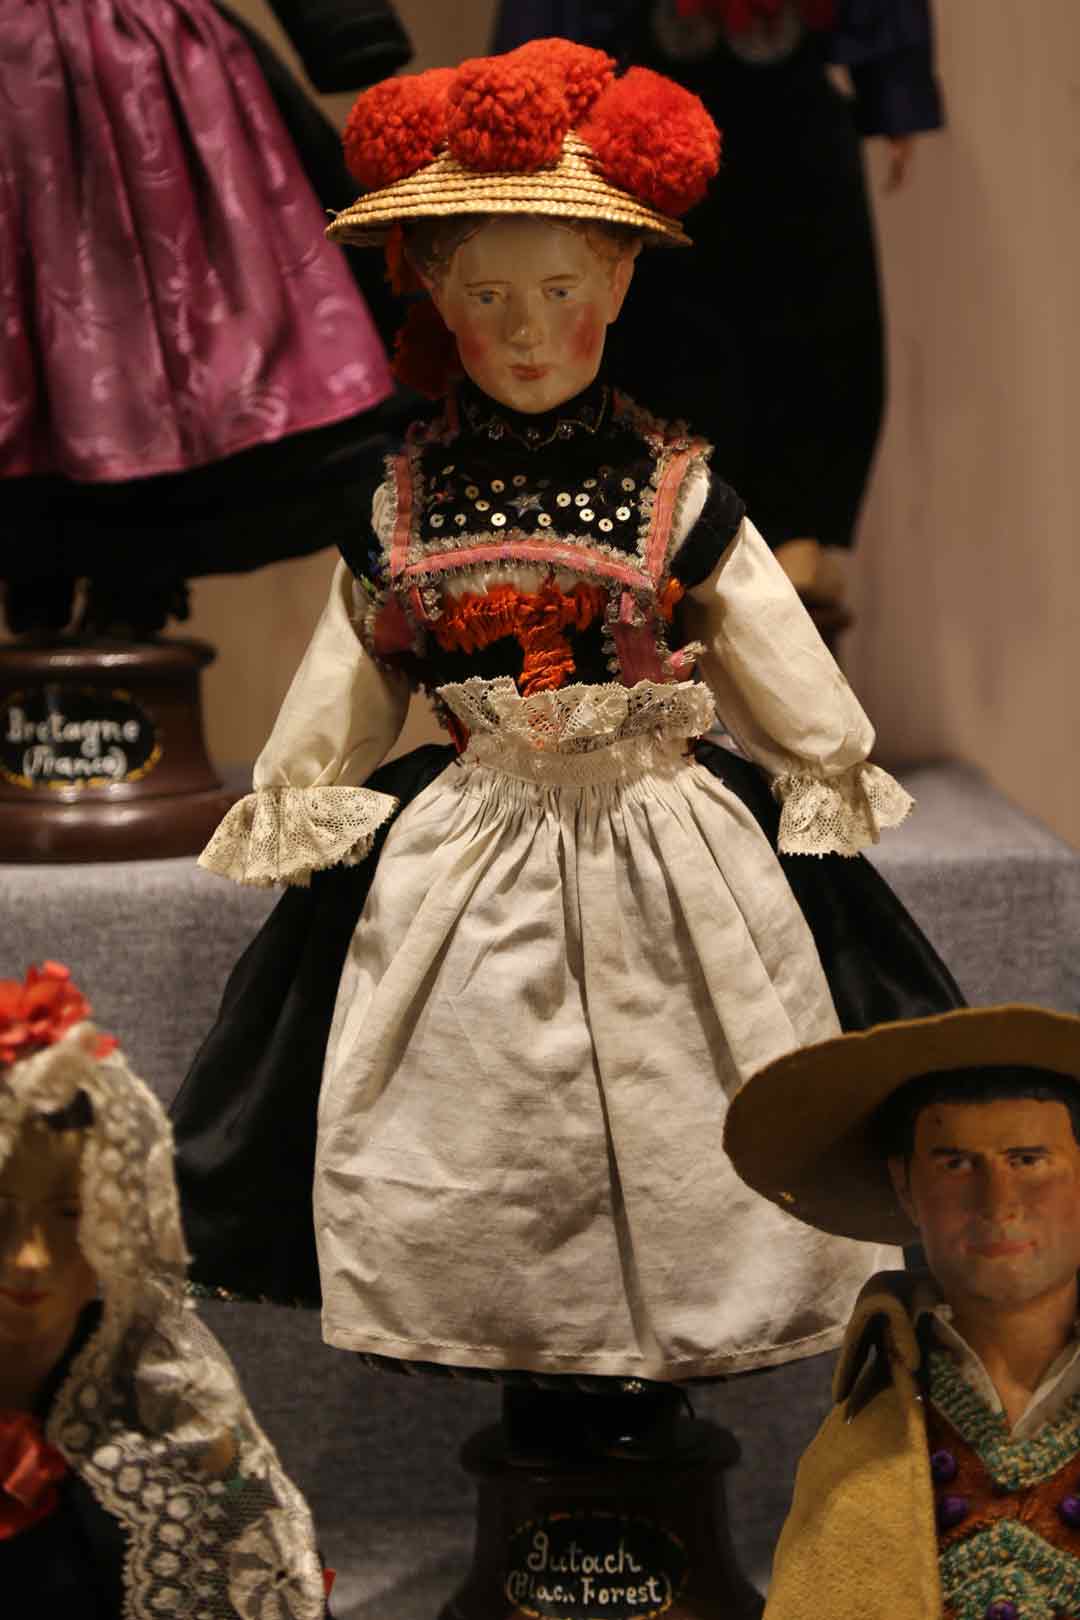 female doll wearing black, whit, and red dress